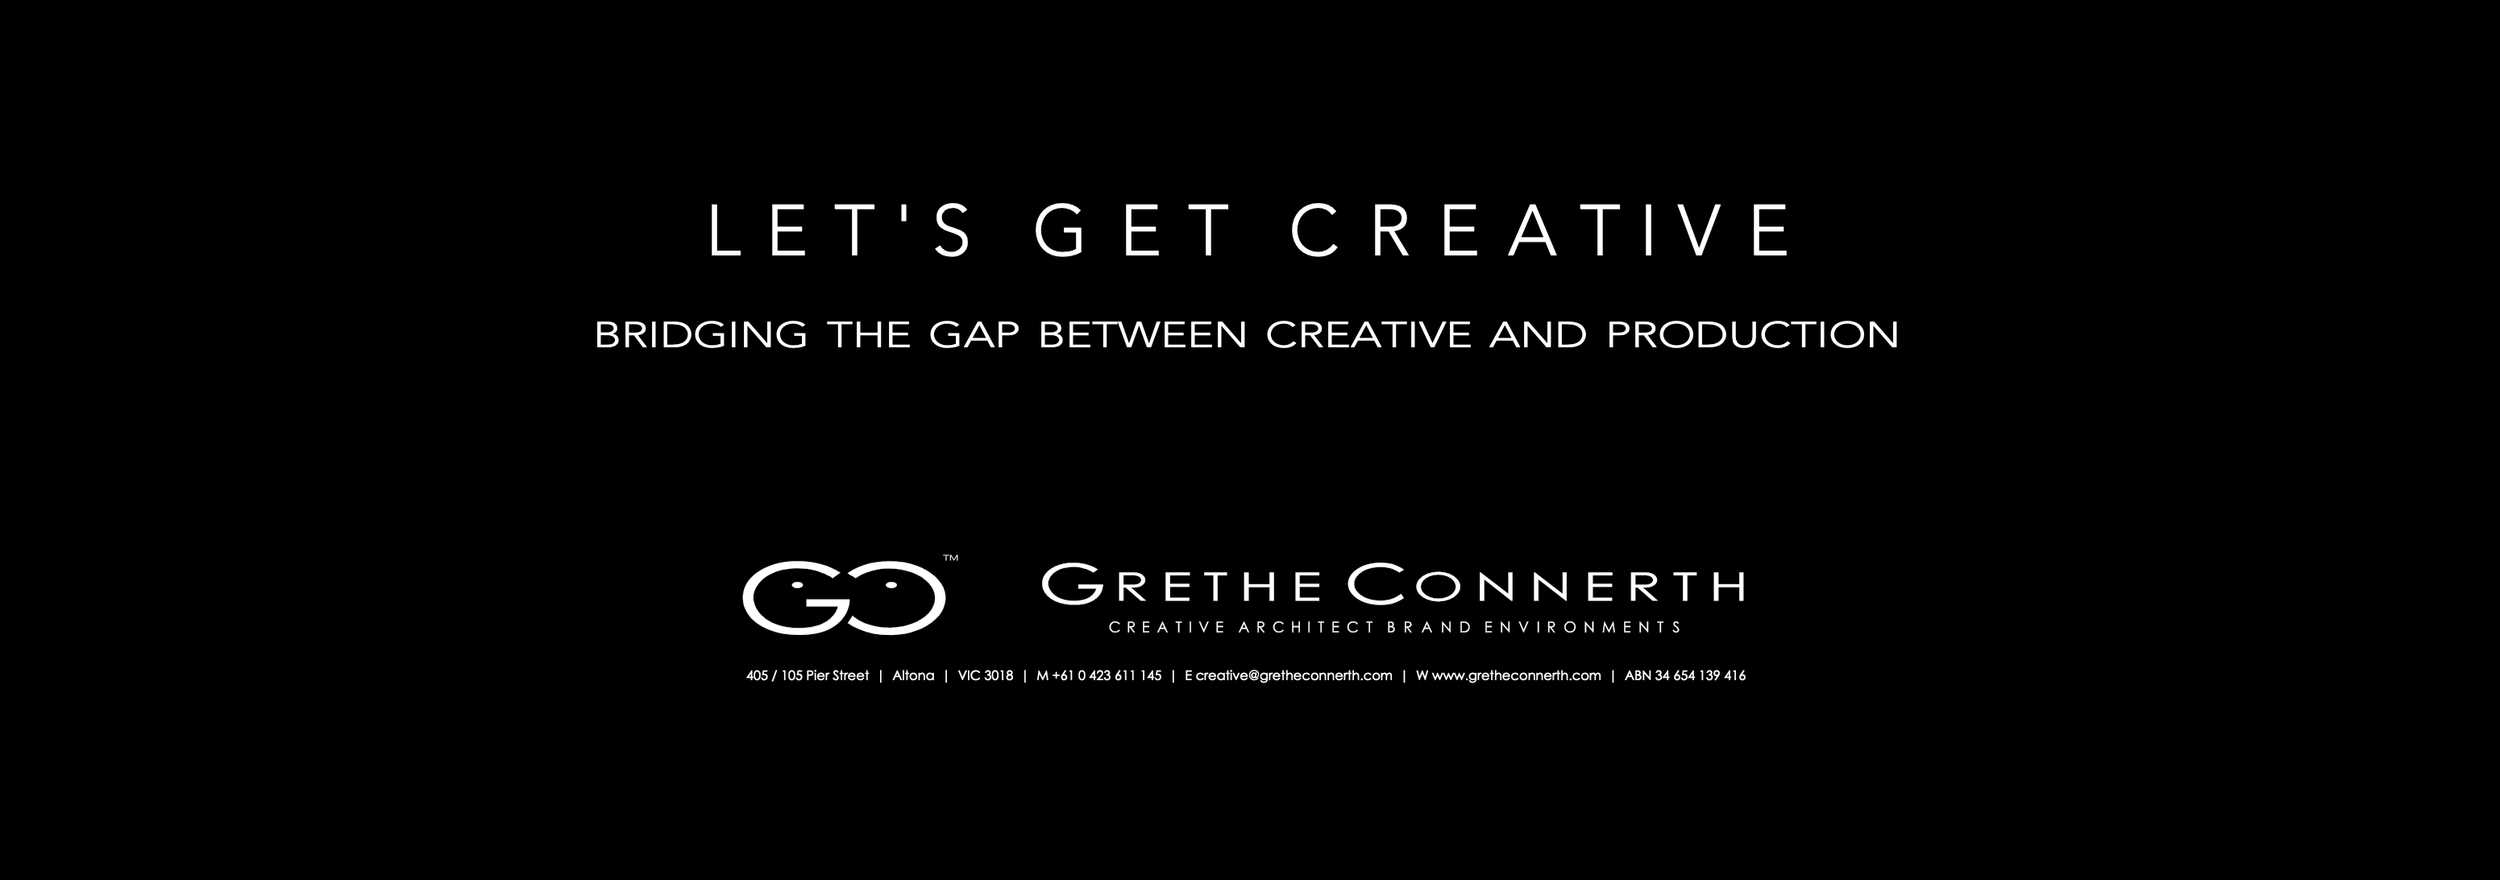 Grethe+Connerth+Twinmotion+Vectorworks+Real Time Visualisations+Model+Archviz+Trade+Show+Displays+Expo+Booth+Exhibition+Display+Design+Digital+Banner+Print+Expo+Booth+Gallery+Museum+Retail+Brand+Academy+Commercial+Event+Environment+ARCHITECTURE+Intro.png